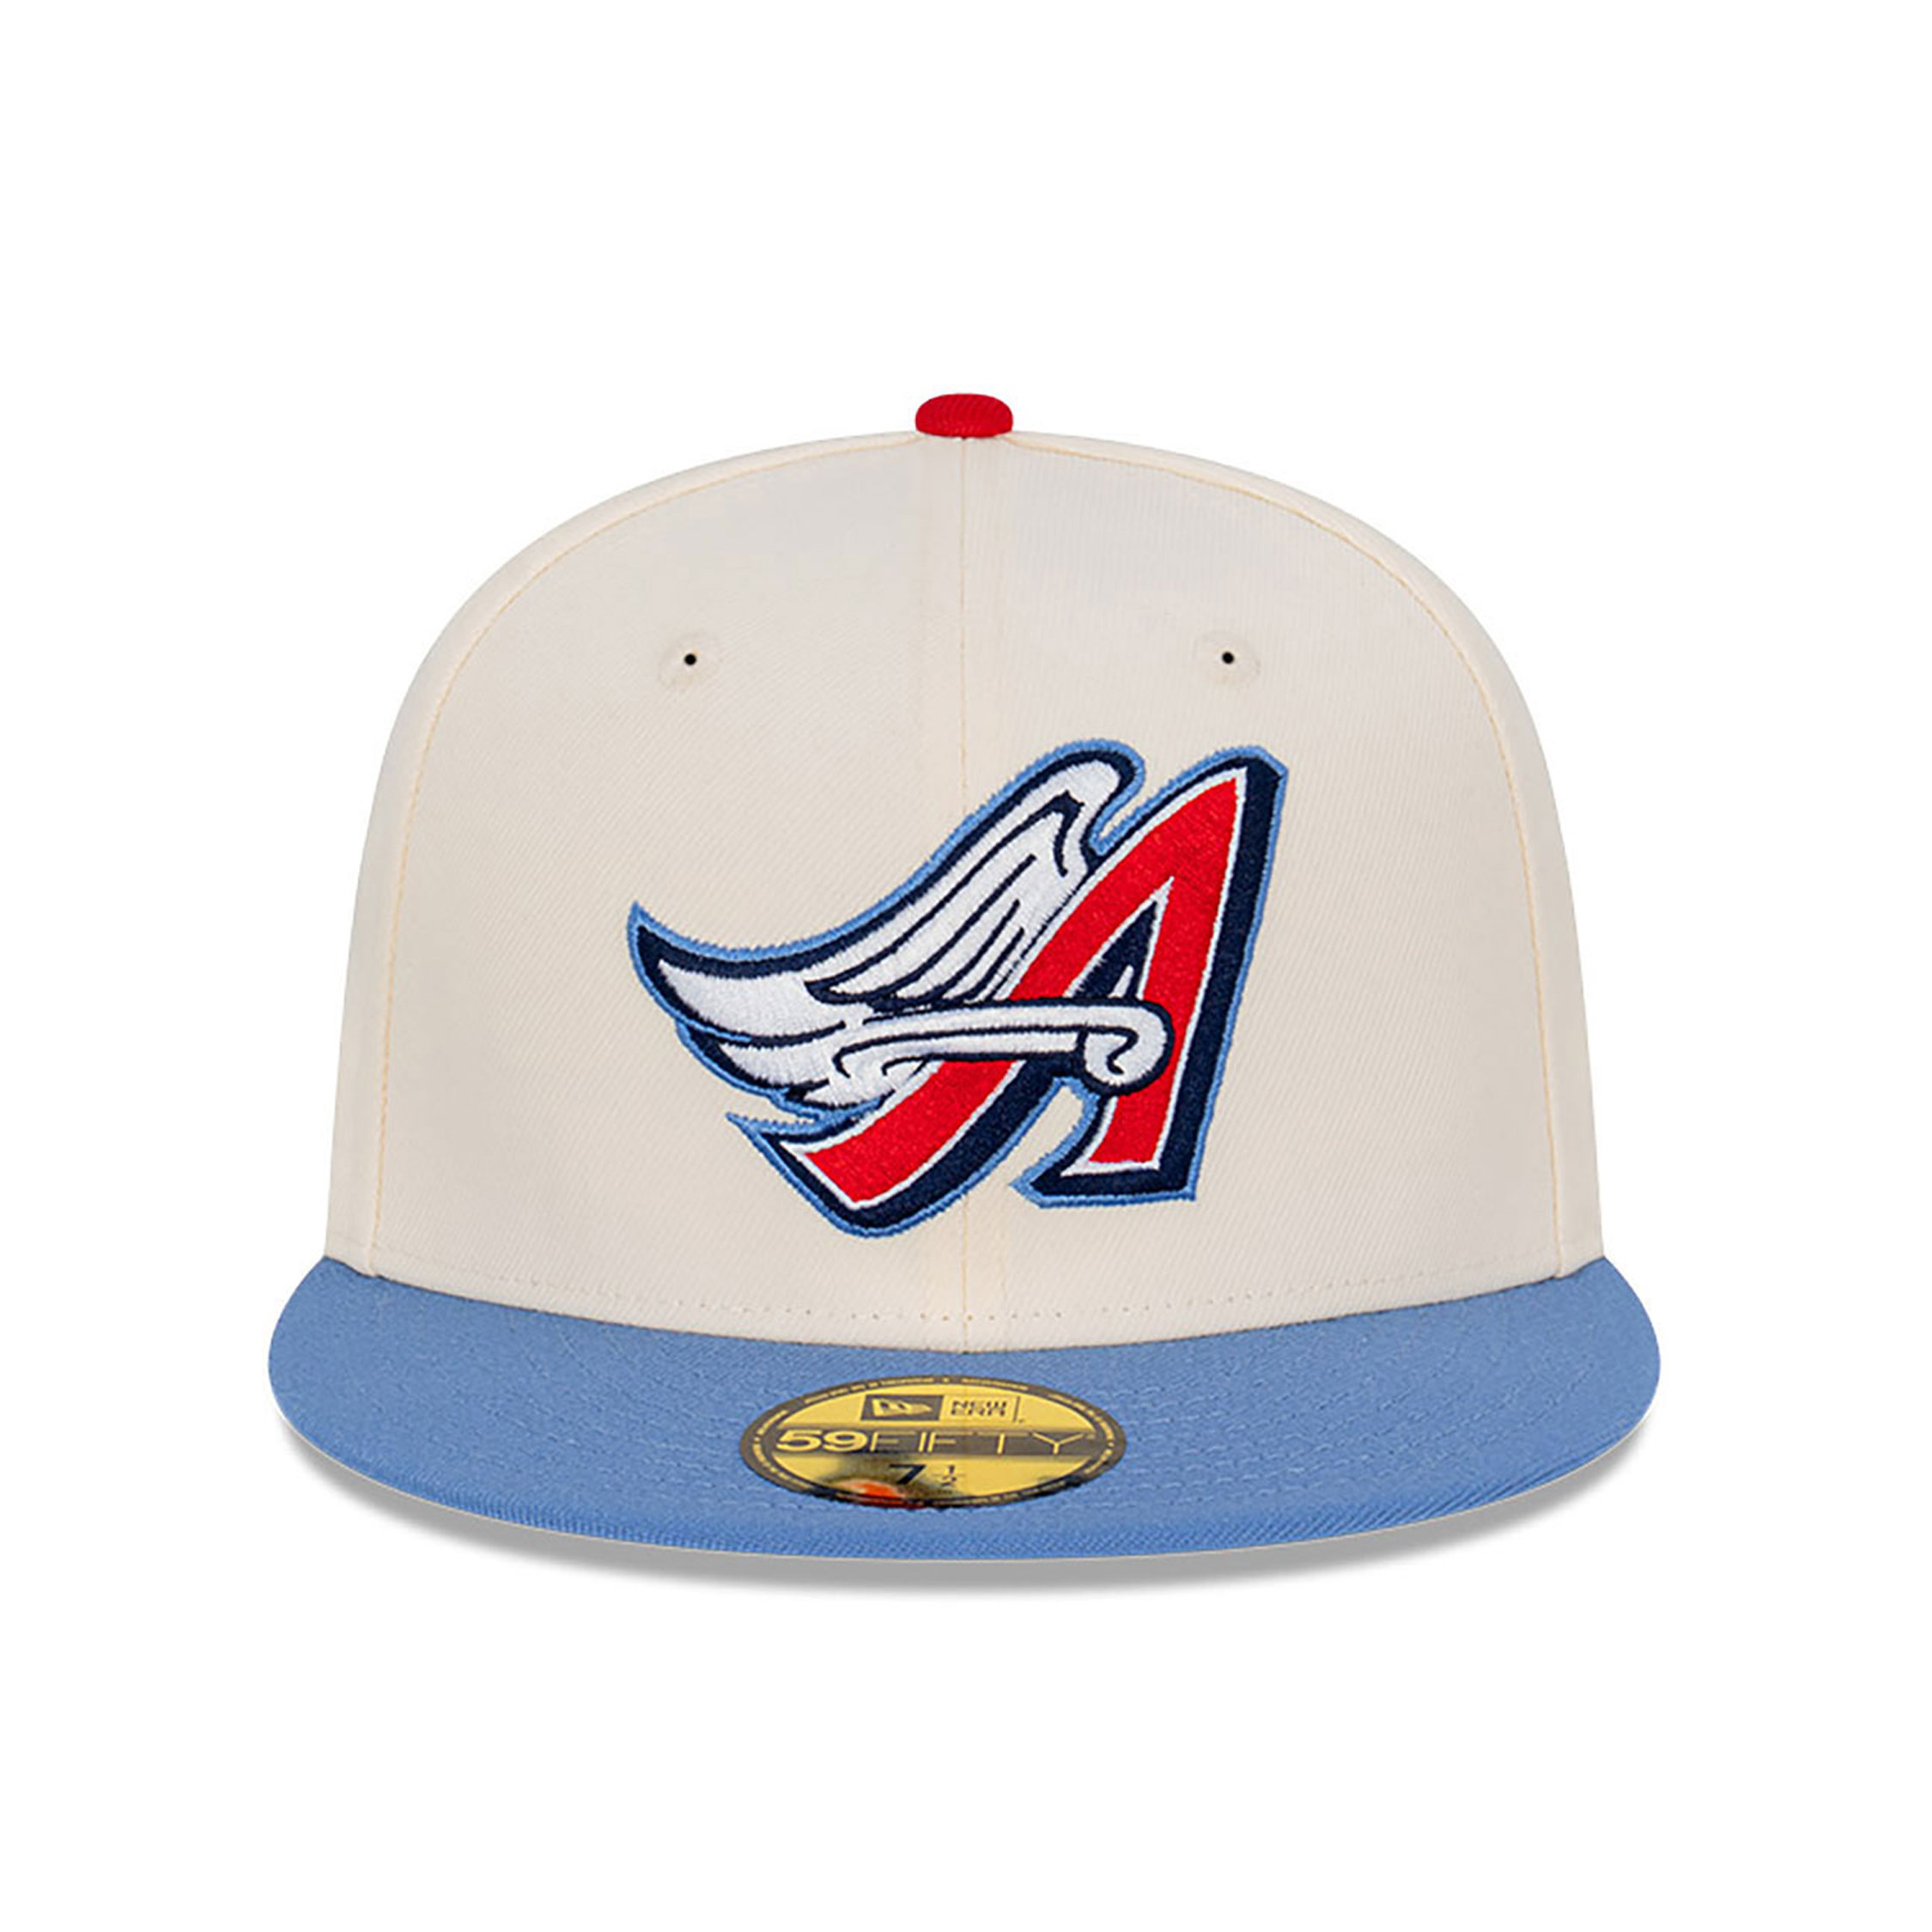 LA Angels Cooperstown Chrome White 59FIFTY Fitted Cap